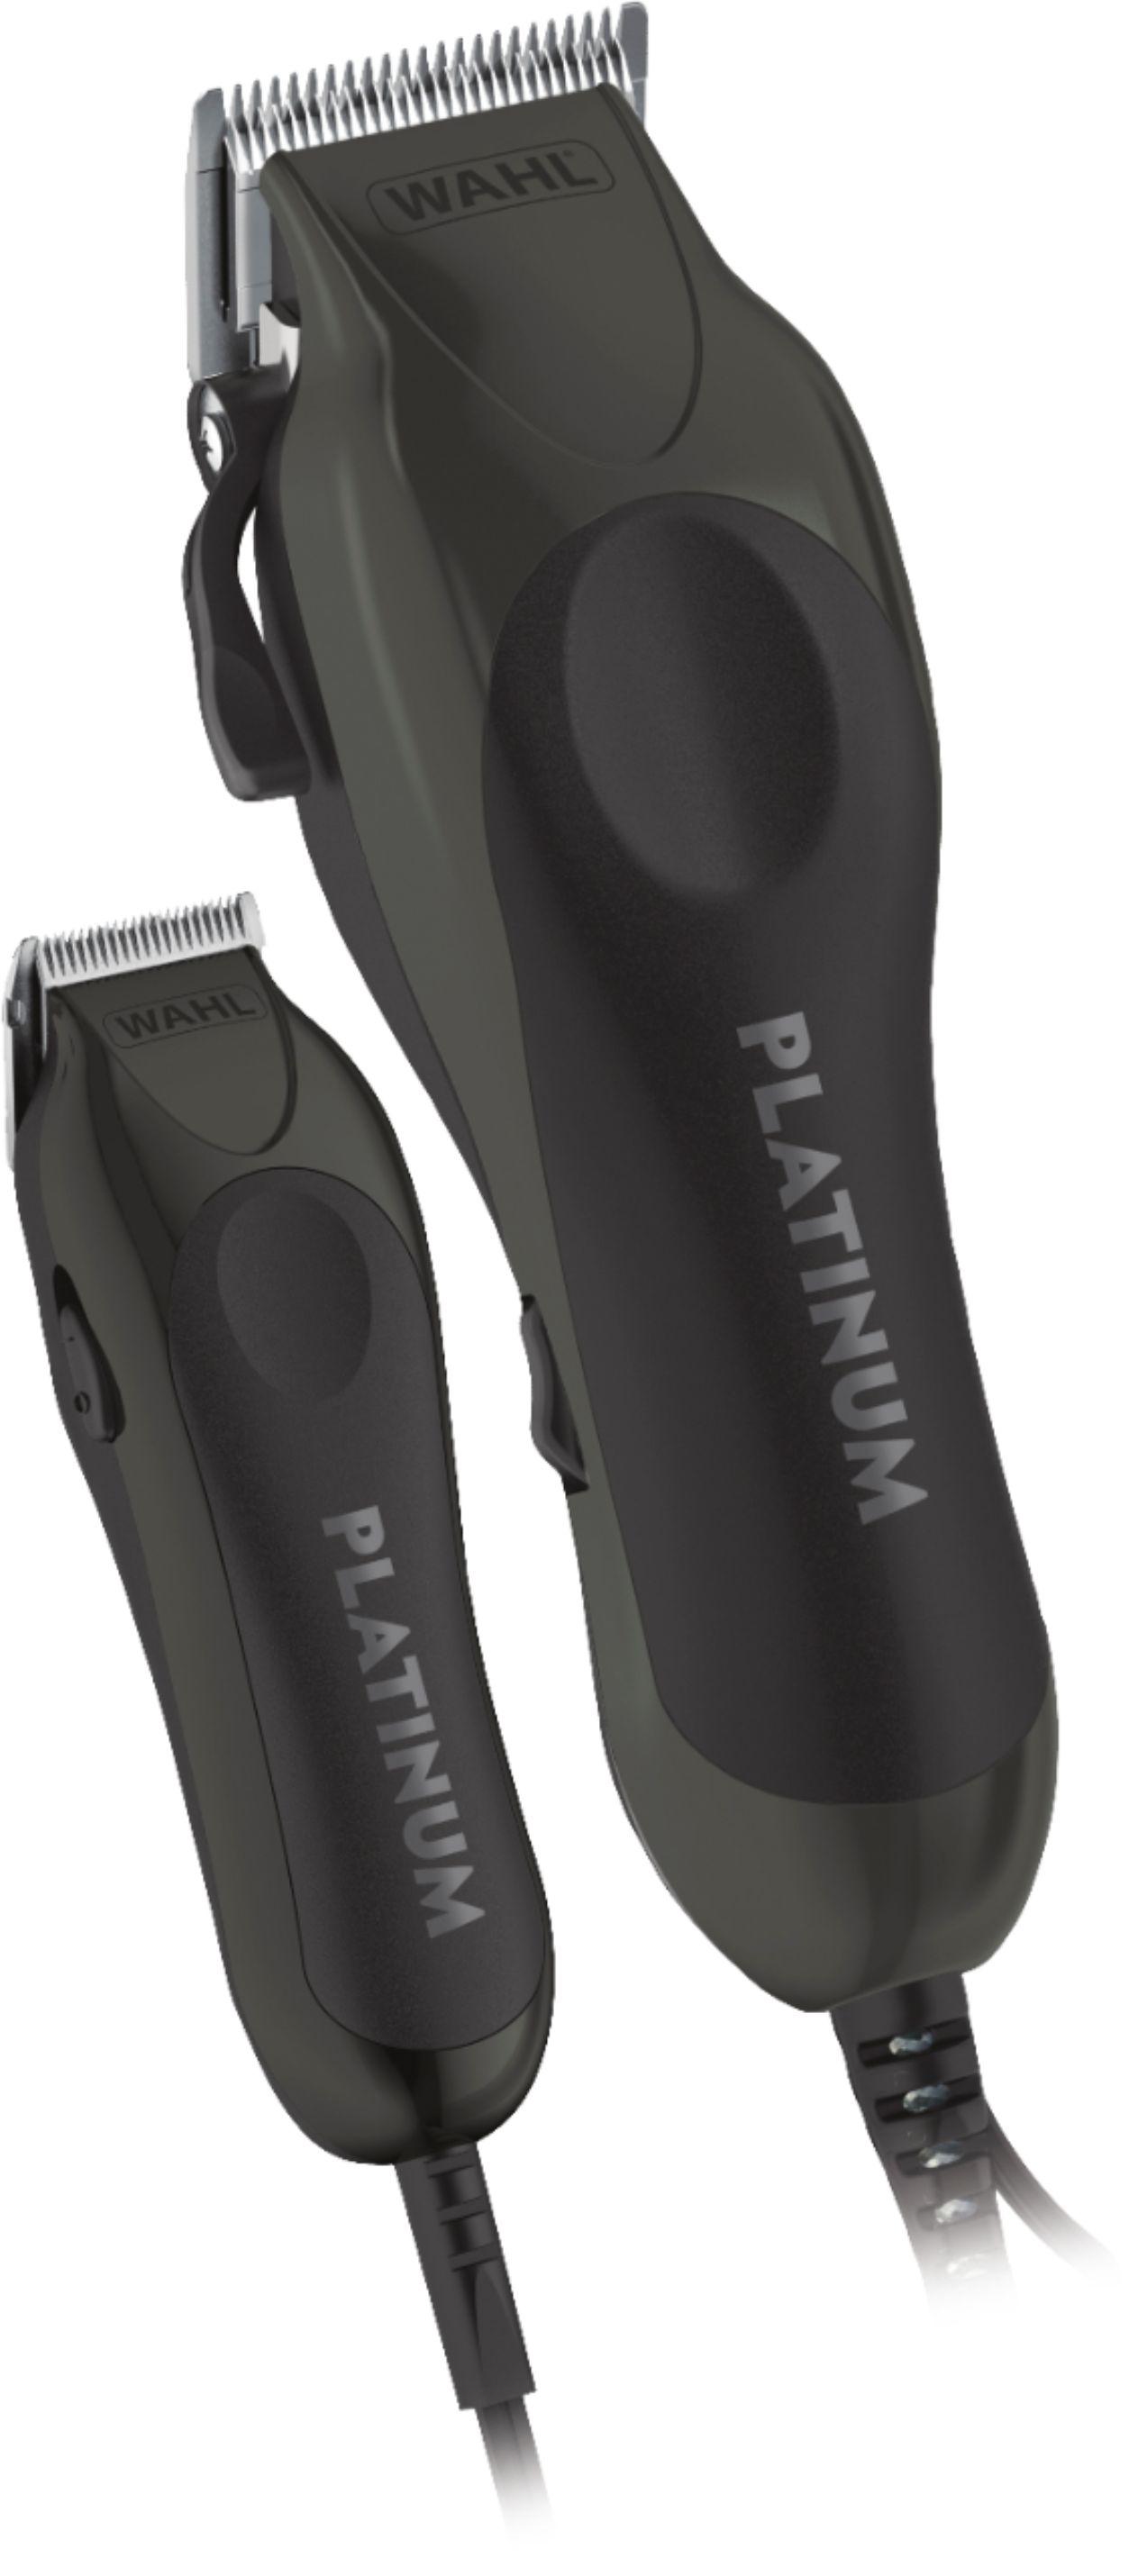 Brand New Wahl Combination Dog Clipper and Trimmer Set 並行輸入品